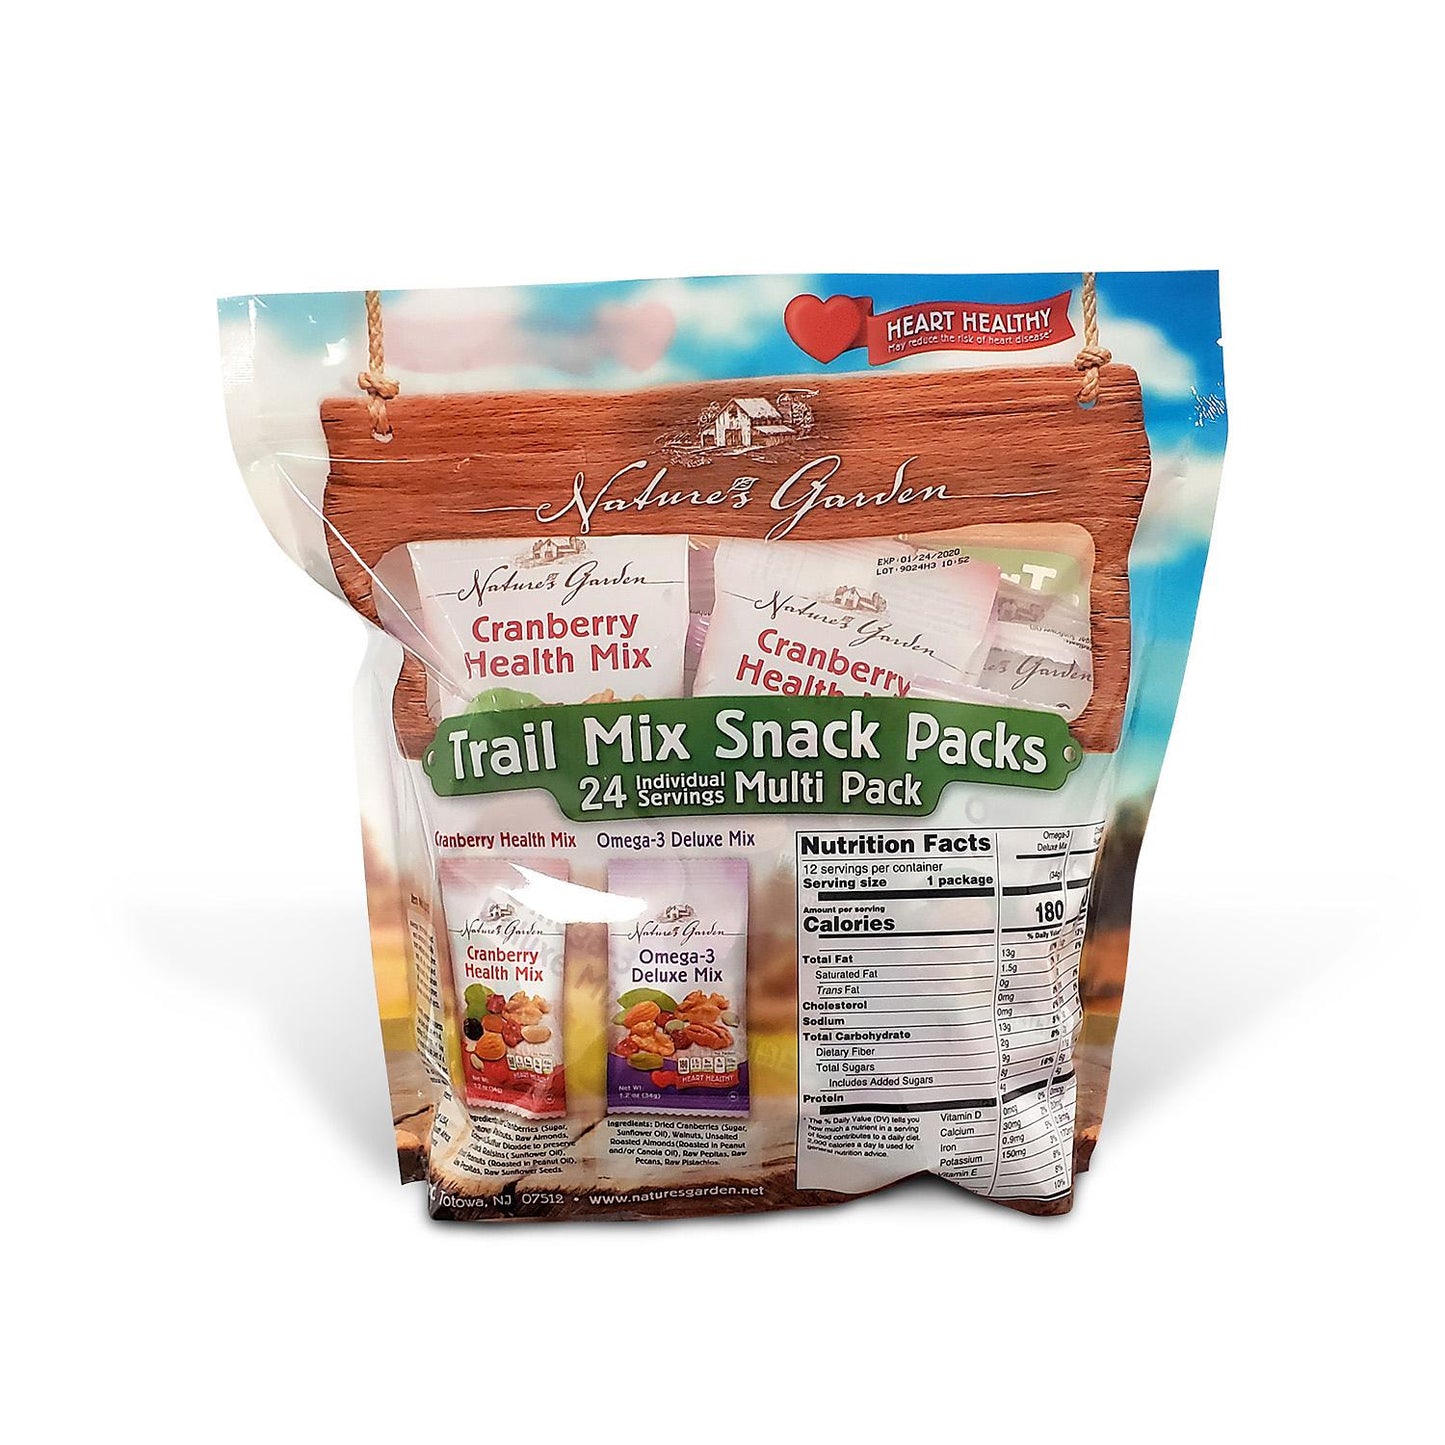 Nature's Garden Trail Mix Snack Packs (24 ct.)